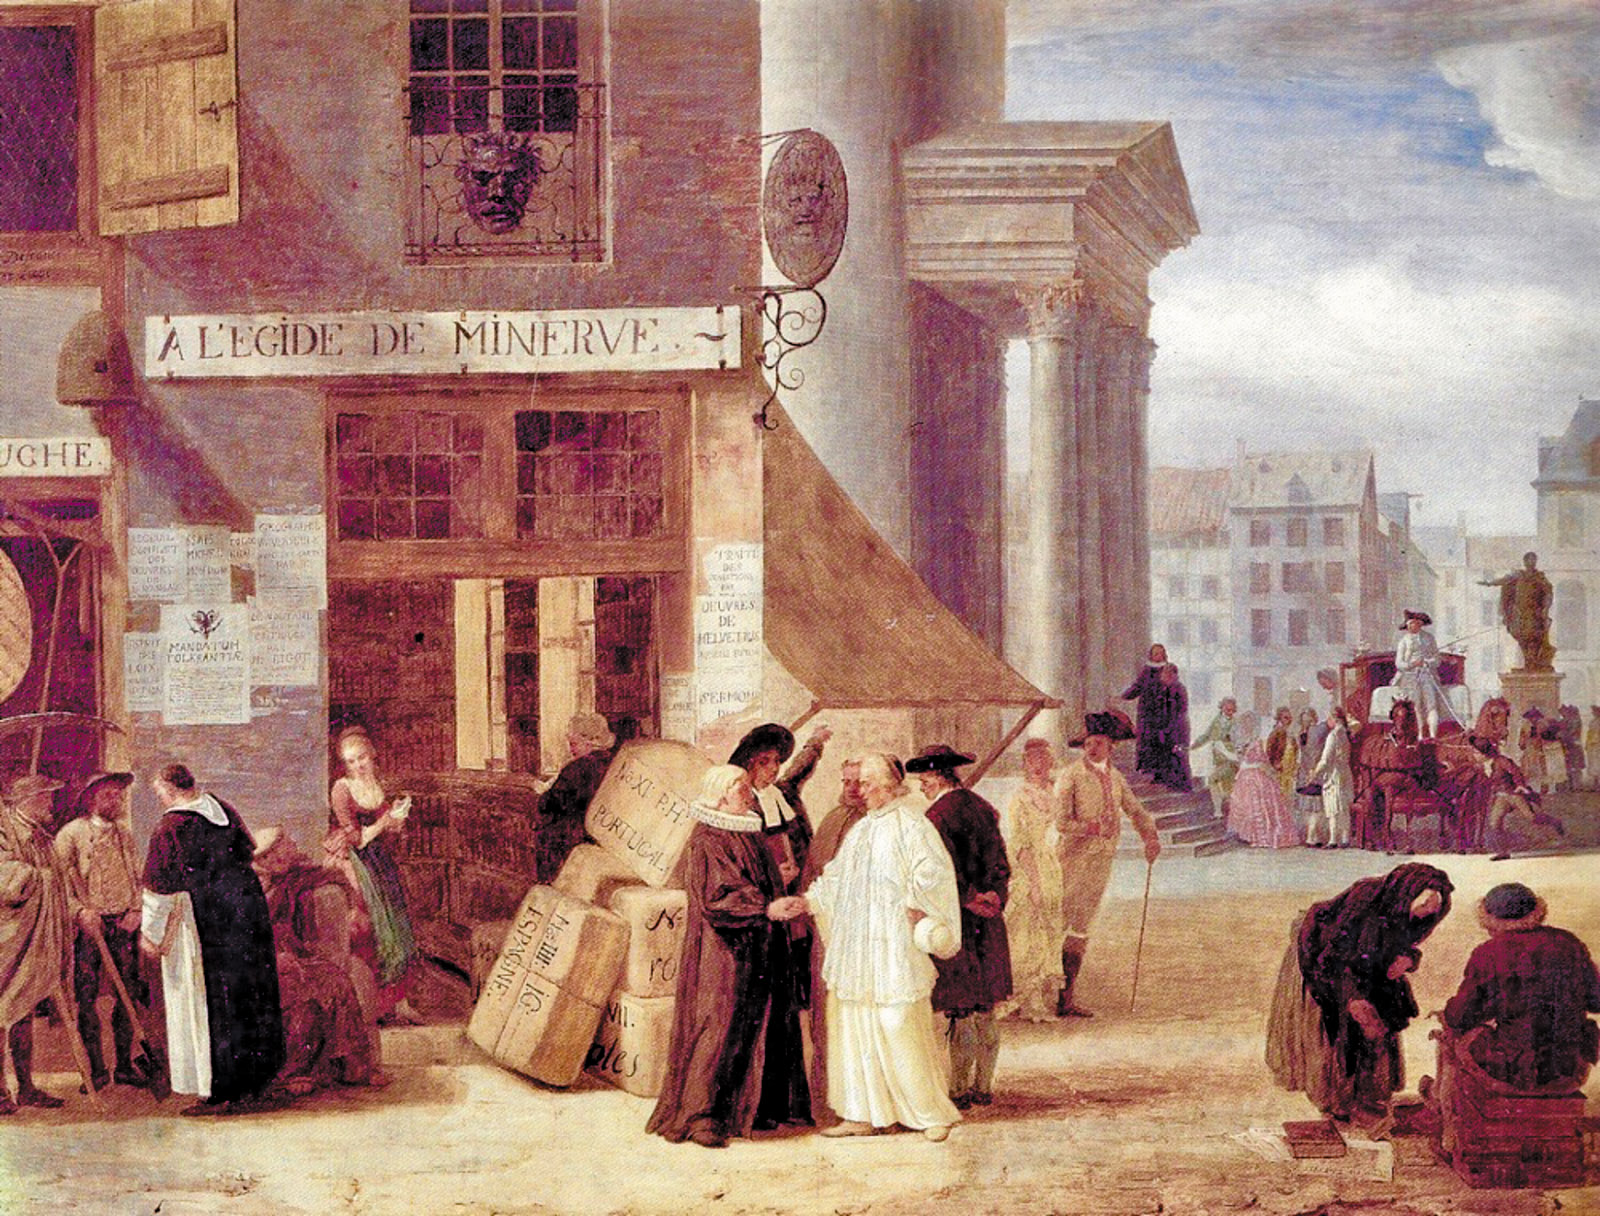 Léonard Defrance de Liège: The Shield of Minerva, 1781. The painting was inspired by the Austrian emperor Joseph II’s 1781 edict of religious tolerance. Announcements of works by Enlightenment philosophers are posted on the walls of the bookstore, while the bundles of books stacked outside for shipment to other countries signify the free diffusion of ideas.